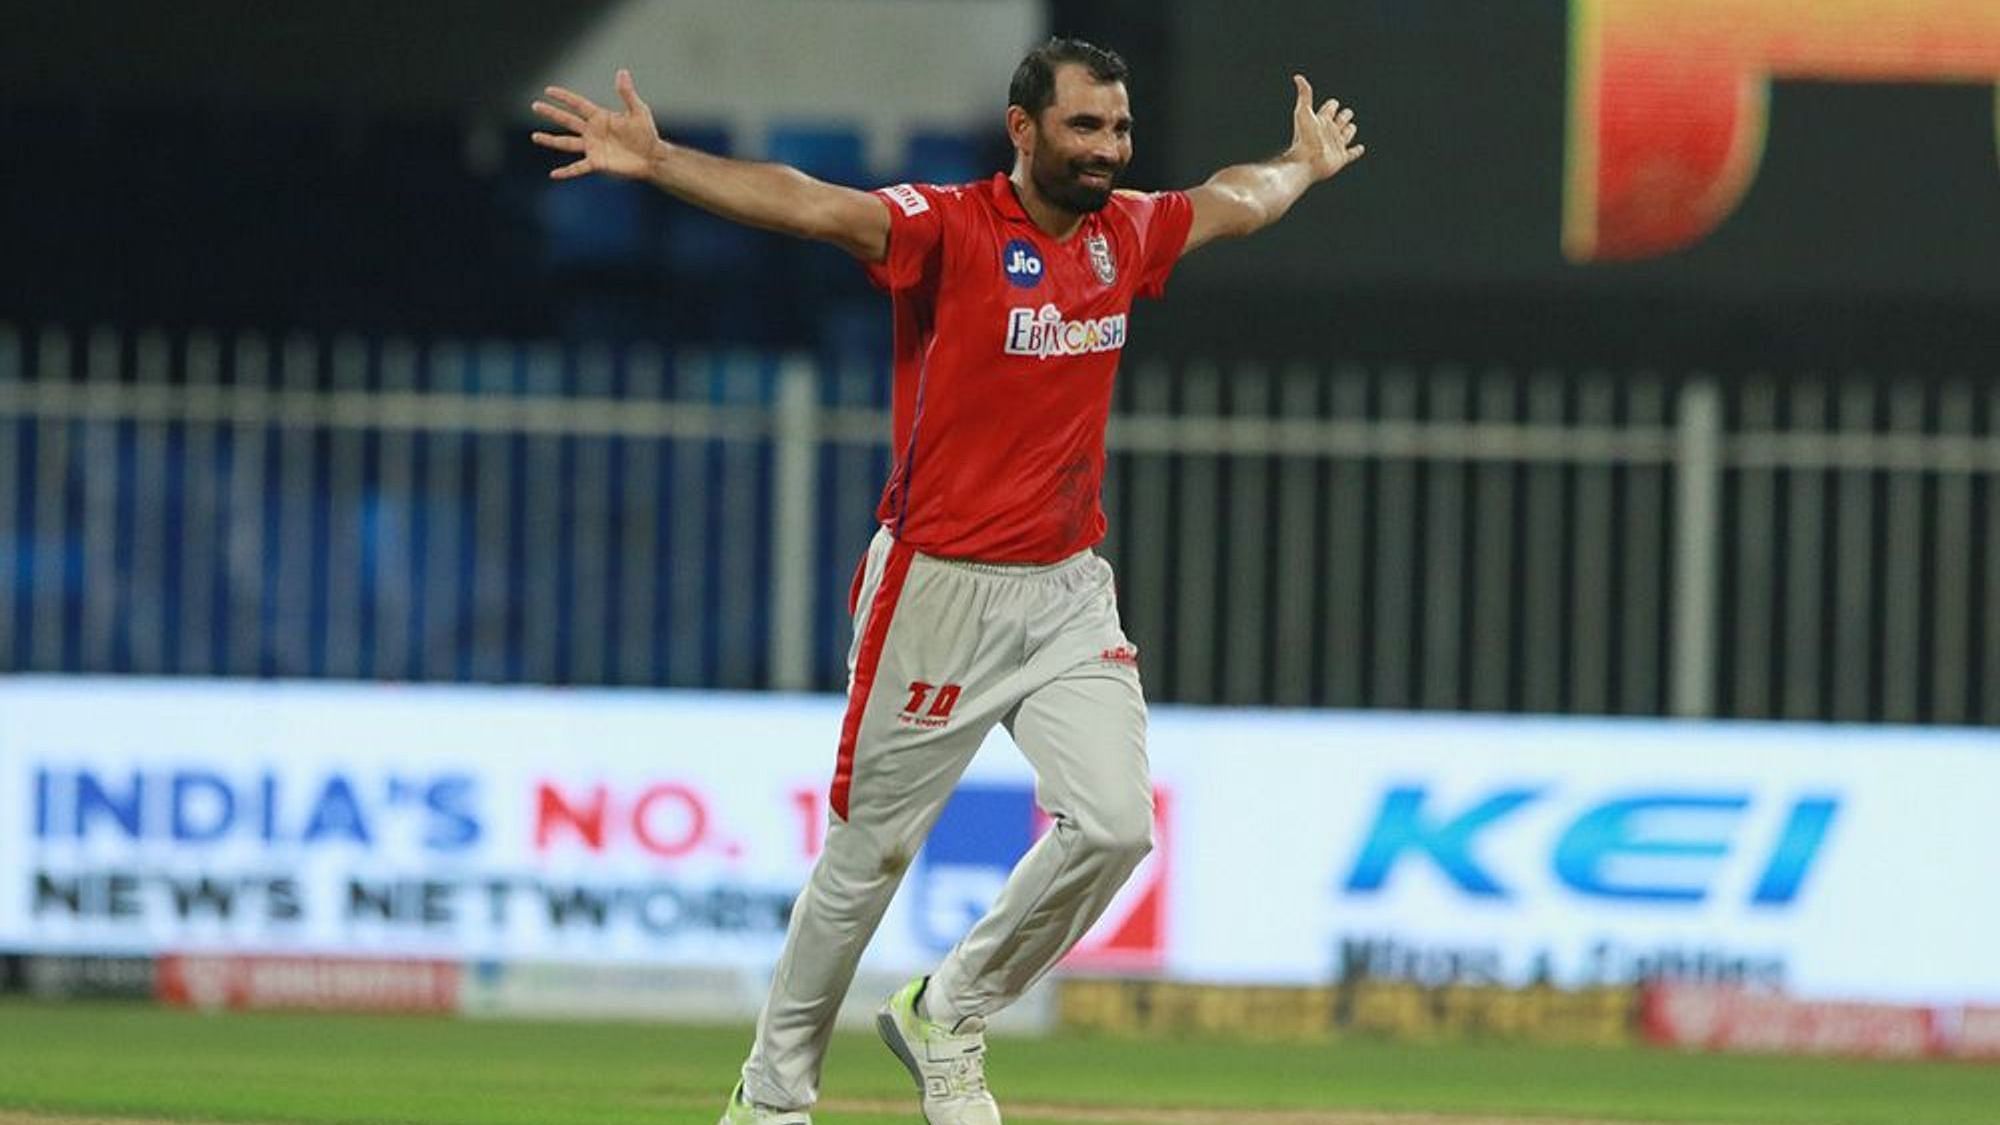 Mohammad Shami played a key role for Punjab Kings in IPL 2020.&nbsp;